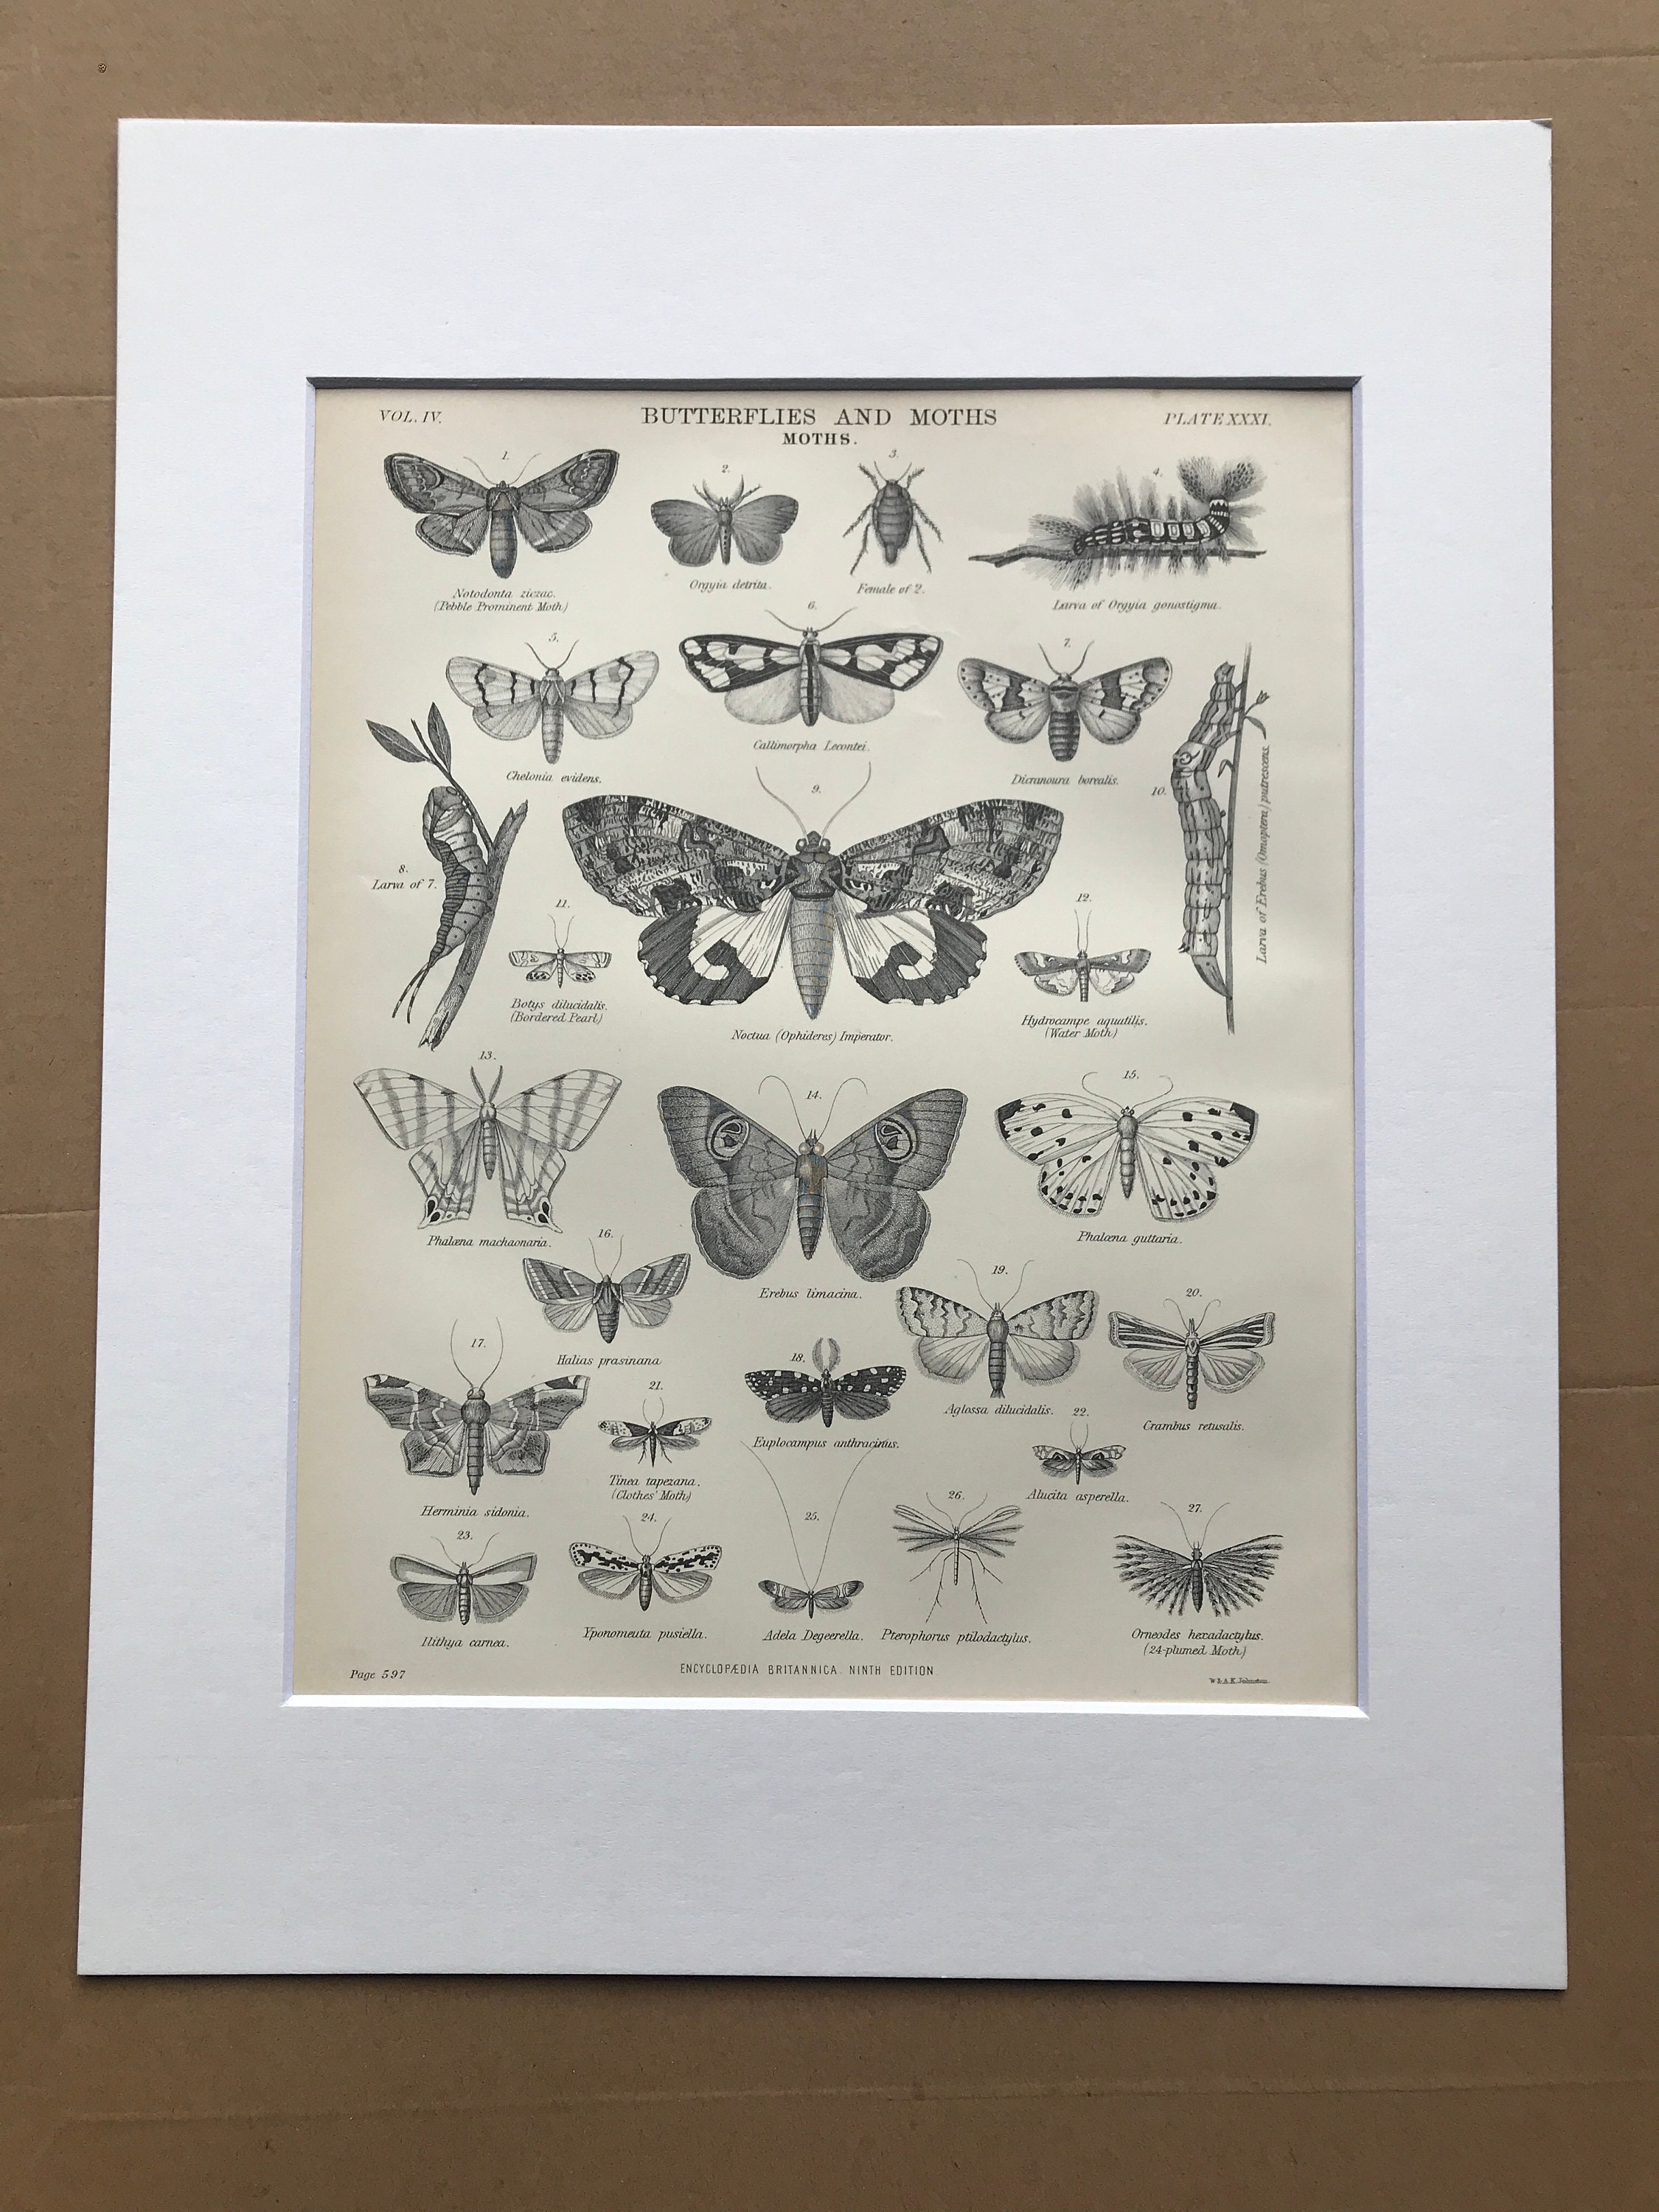 Butterfly & Moth Stickers | Paper Source